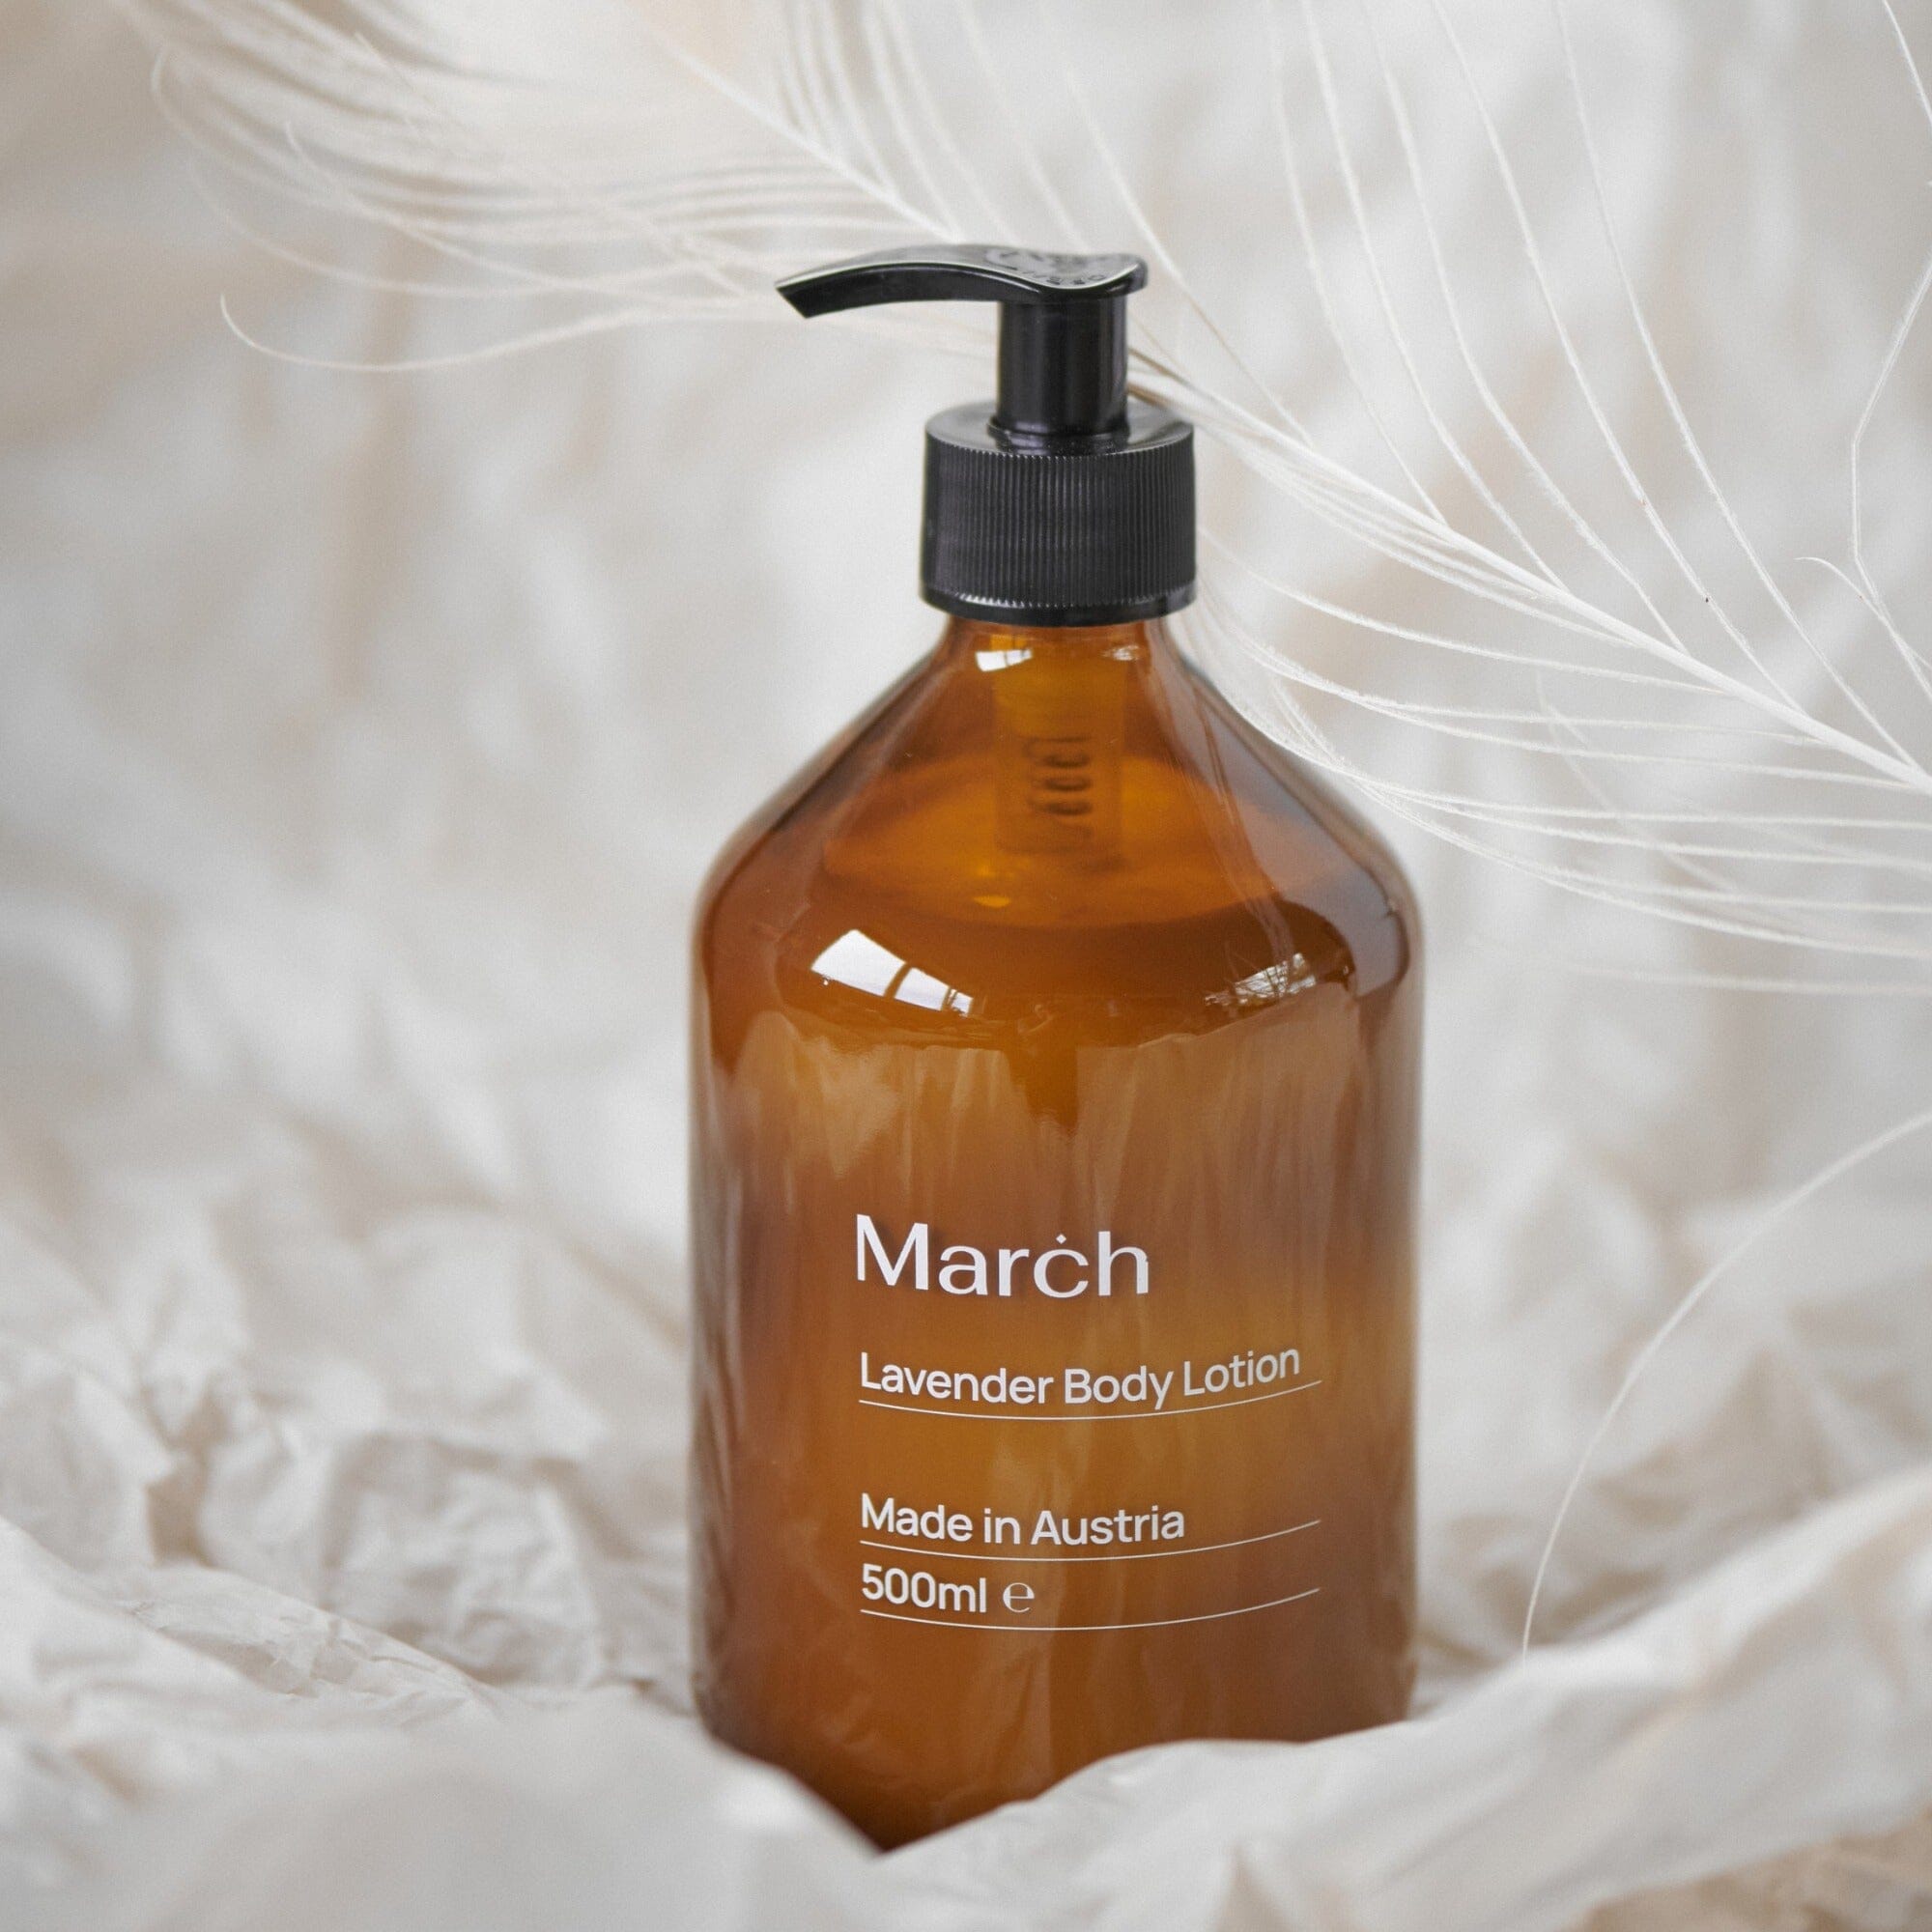 Lavender Body Lotion Body Lotion March Care 500ml 